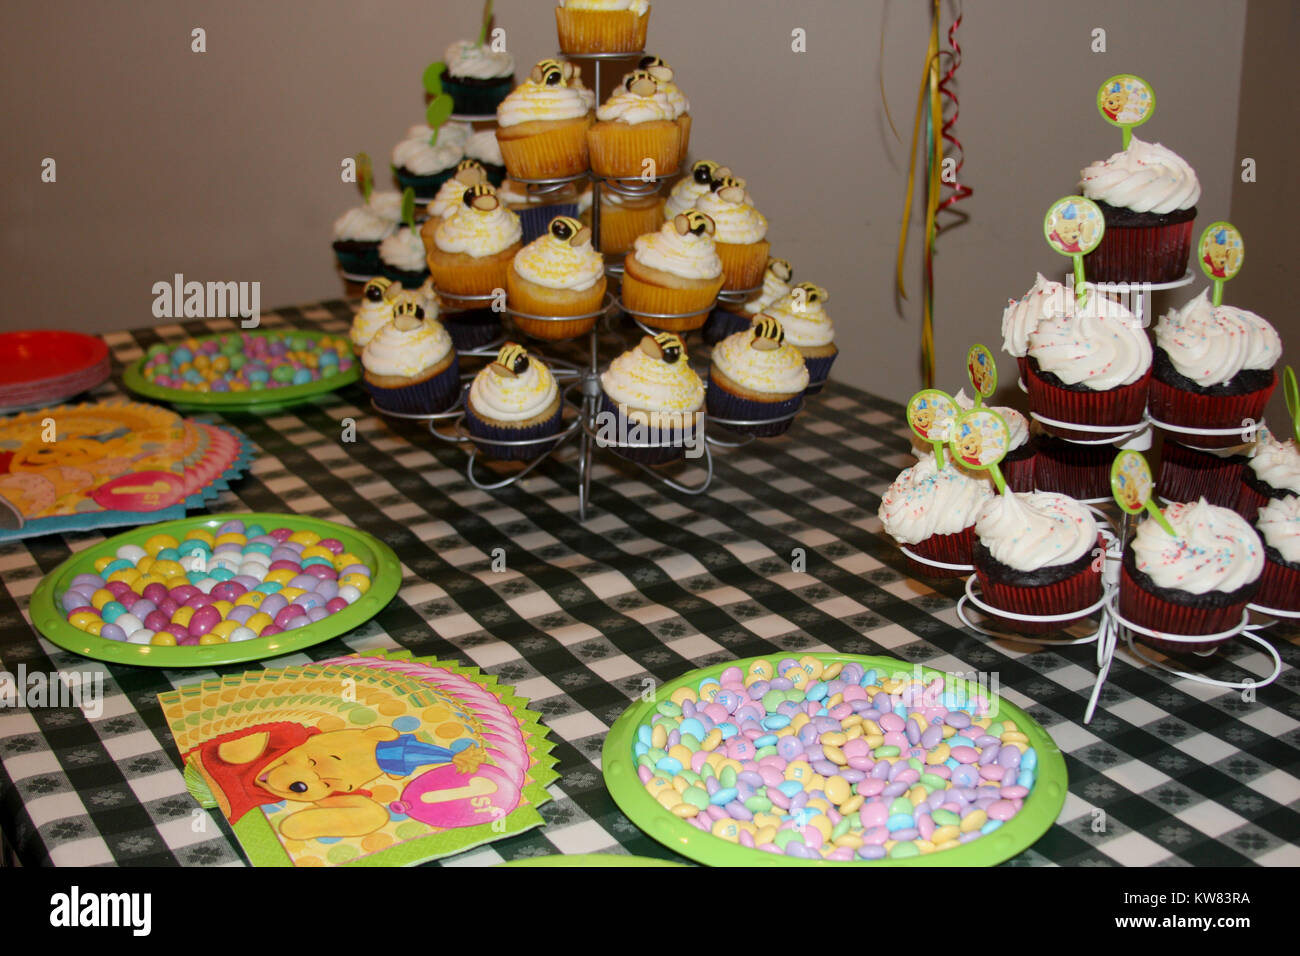 Cupcakes on arranged table for birthday party Stock Photo